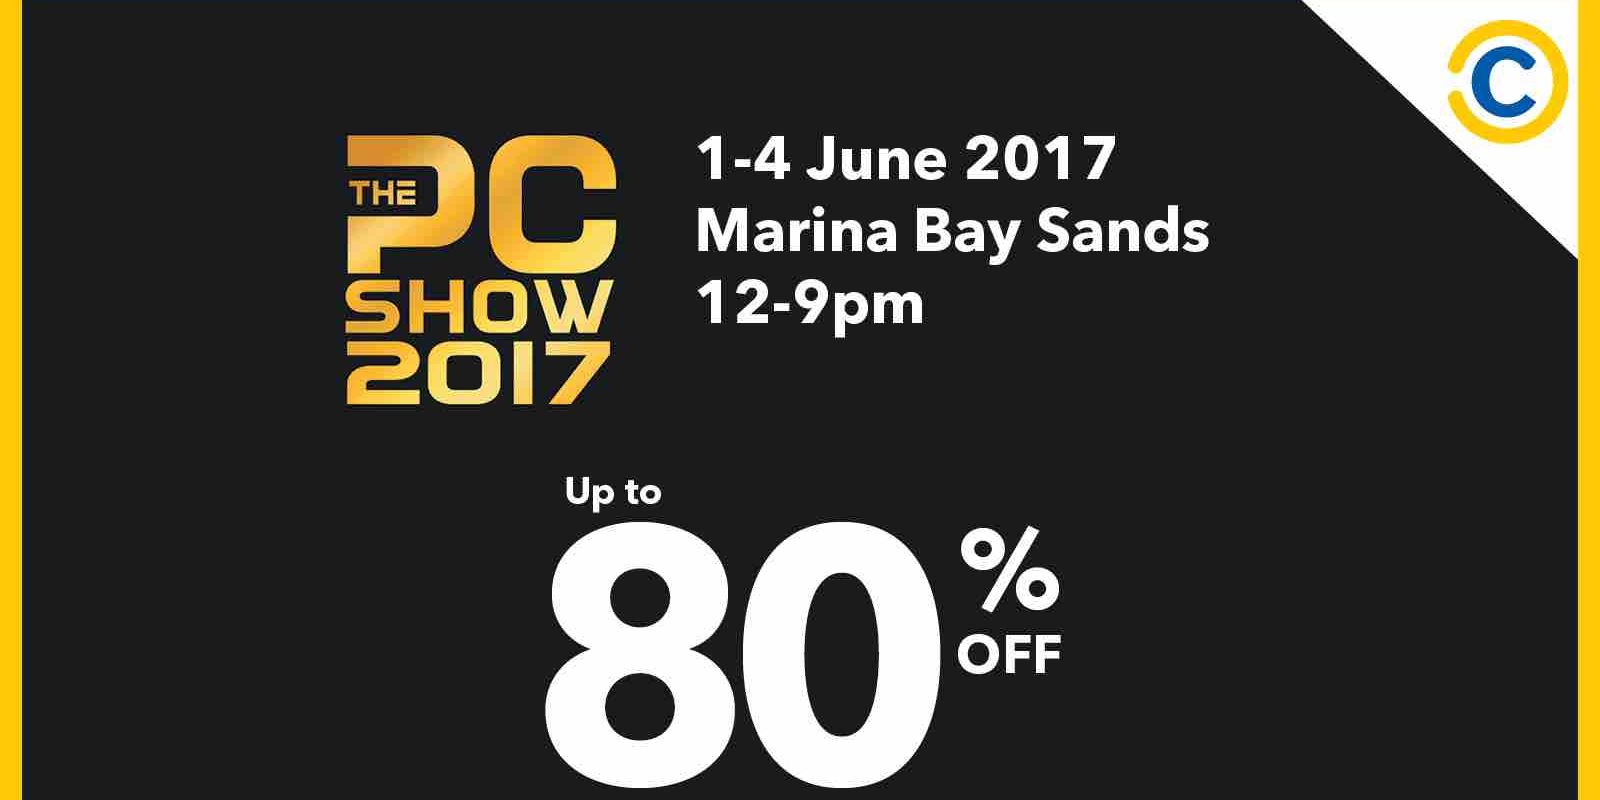 COURTS Singapore The PC Show 2017 Up to 80% Off Promotion 1-4 Jun 2017